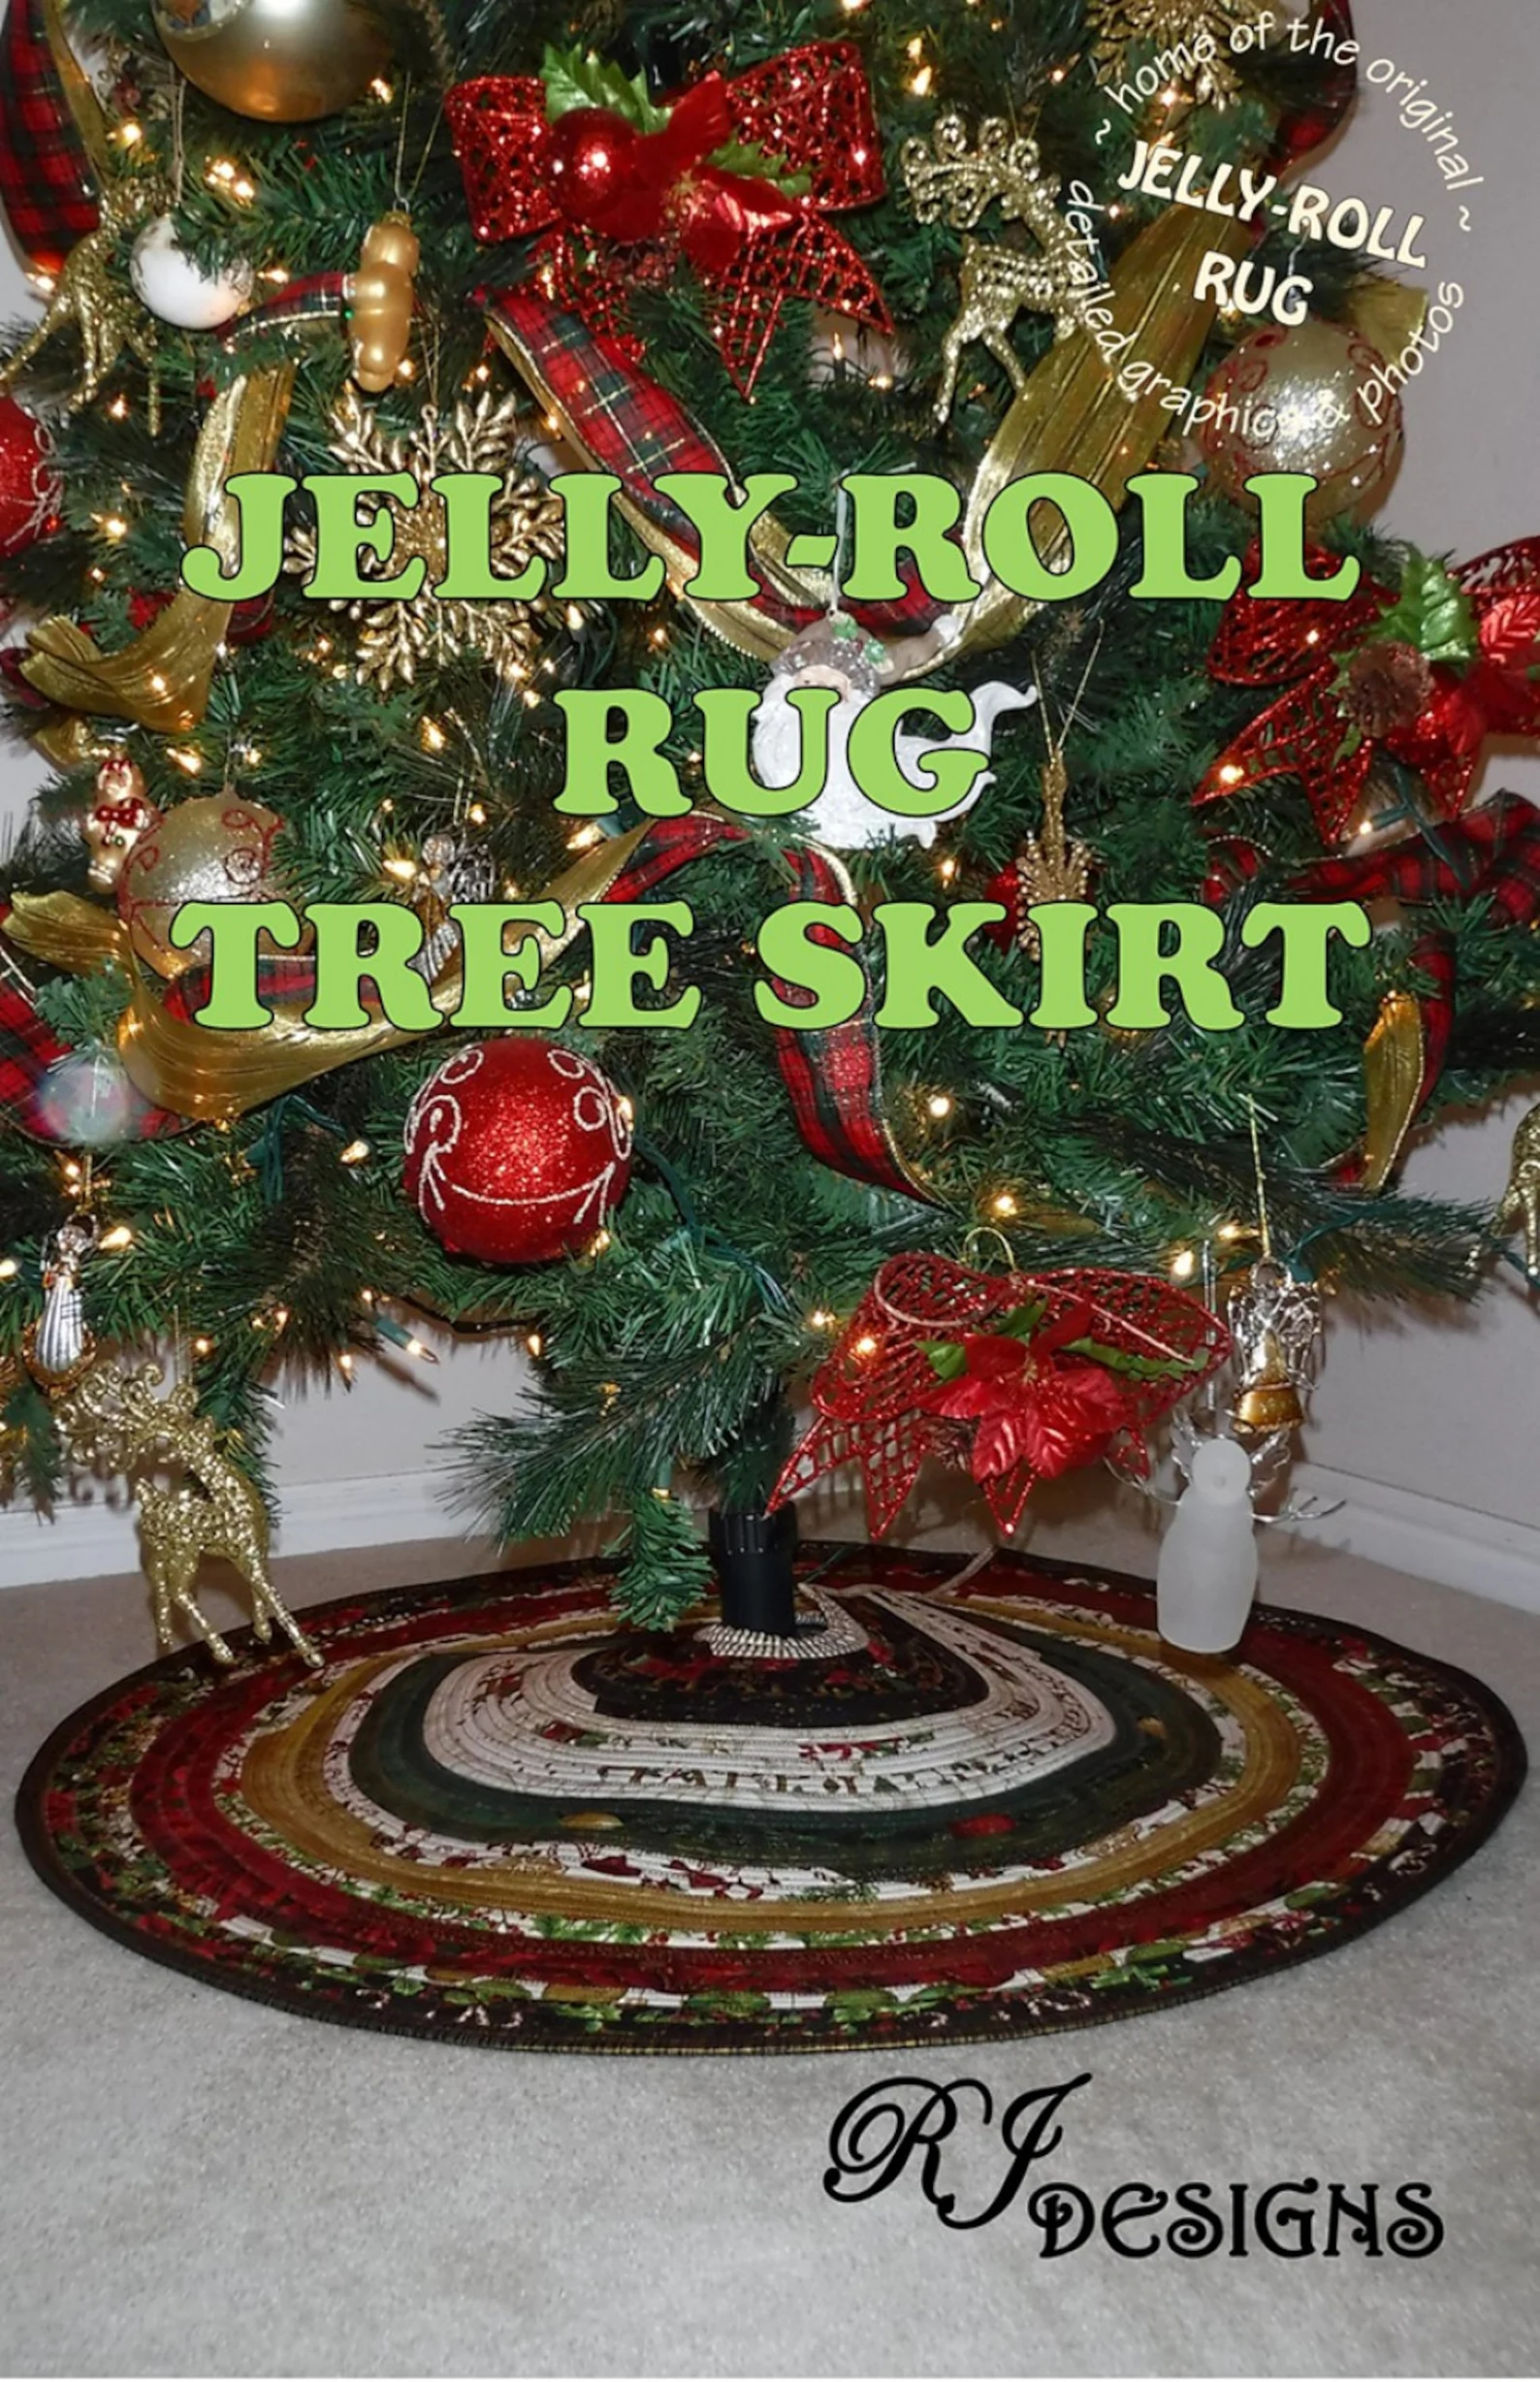 Jelly-Roll Rug Tree Skirt *Pattern for 3 Sizes* From: R J Designs